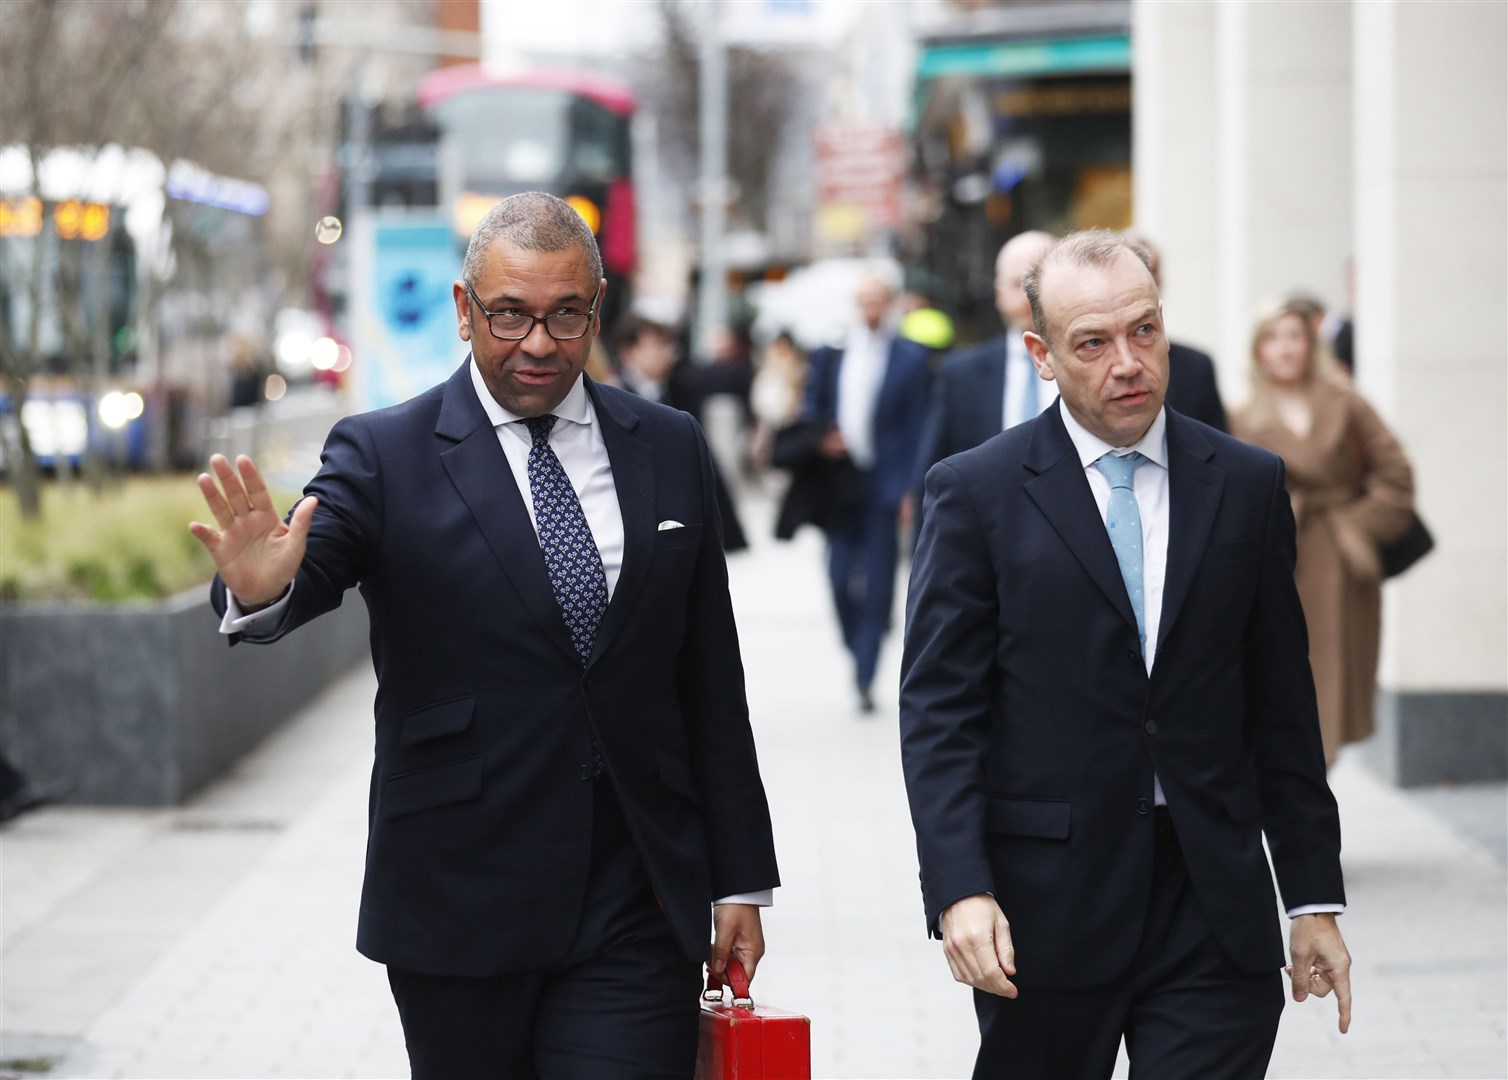 Foreign Secretary James Cleverly (left) with Northern Ireland Secretary Chris Heaton-Harris before a meeting with political members of the Democratic Unionist Party, Ulster Unionist Party and Alliance at government buildings in Belfast city centre. (Peter Morrison/PA)